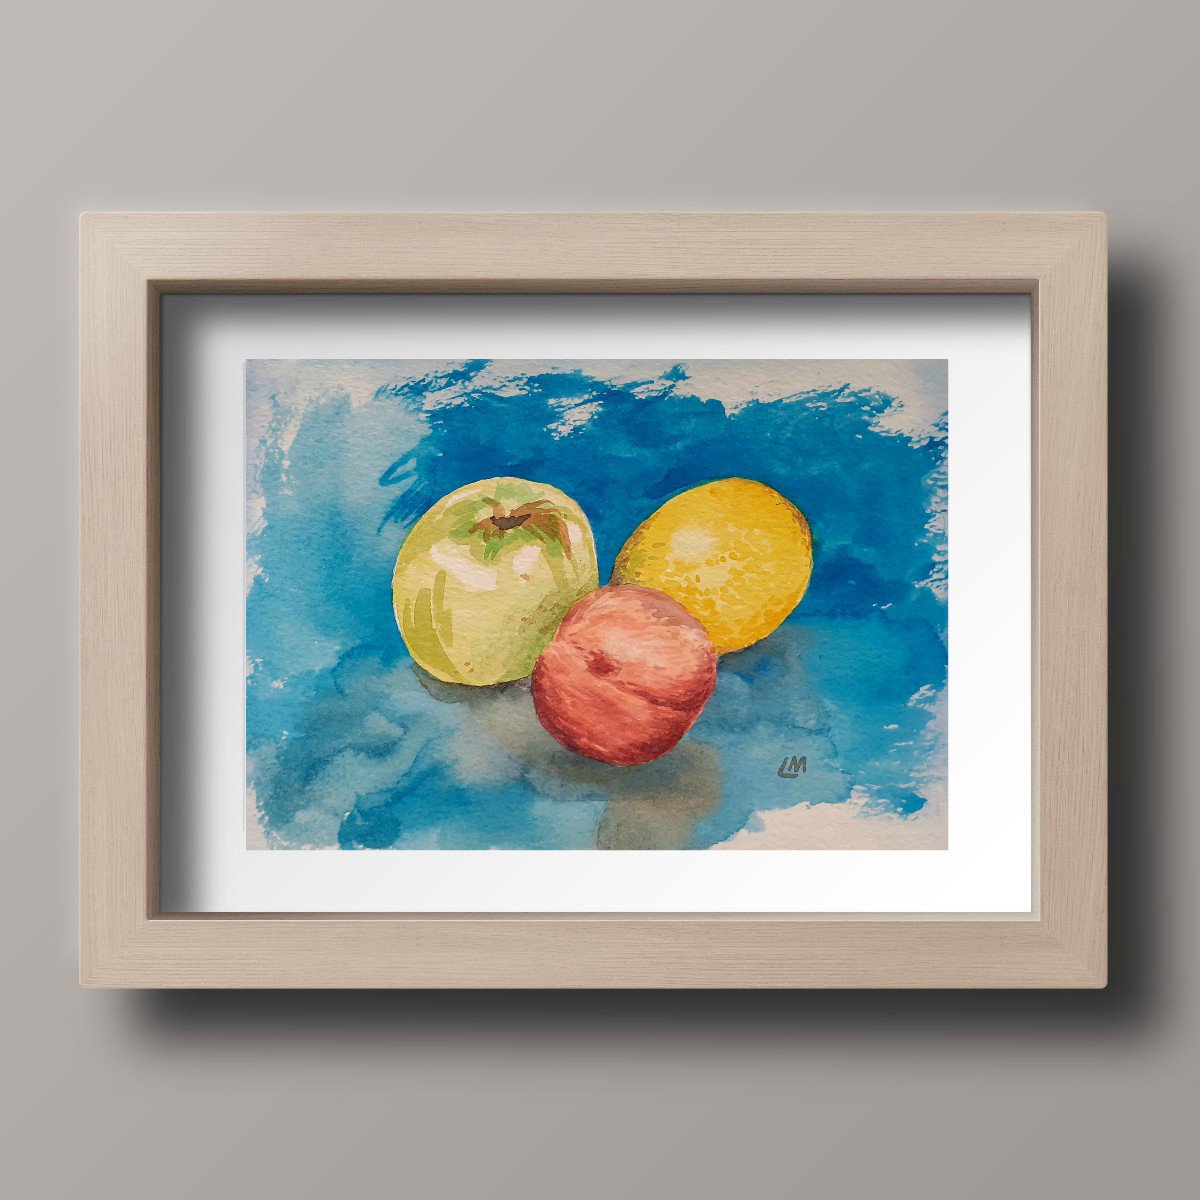 Simply Fruit - Watercolour, small gift idea by Lisa Mann